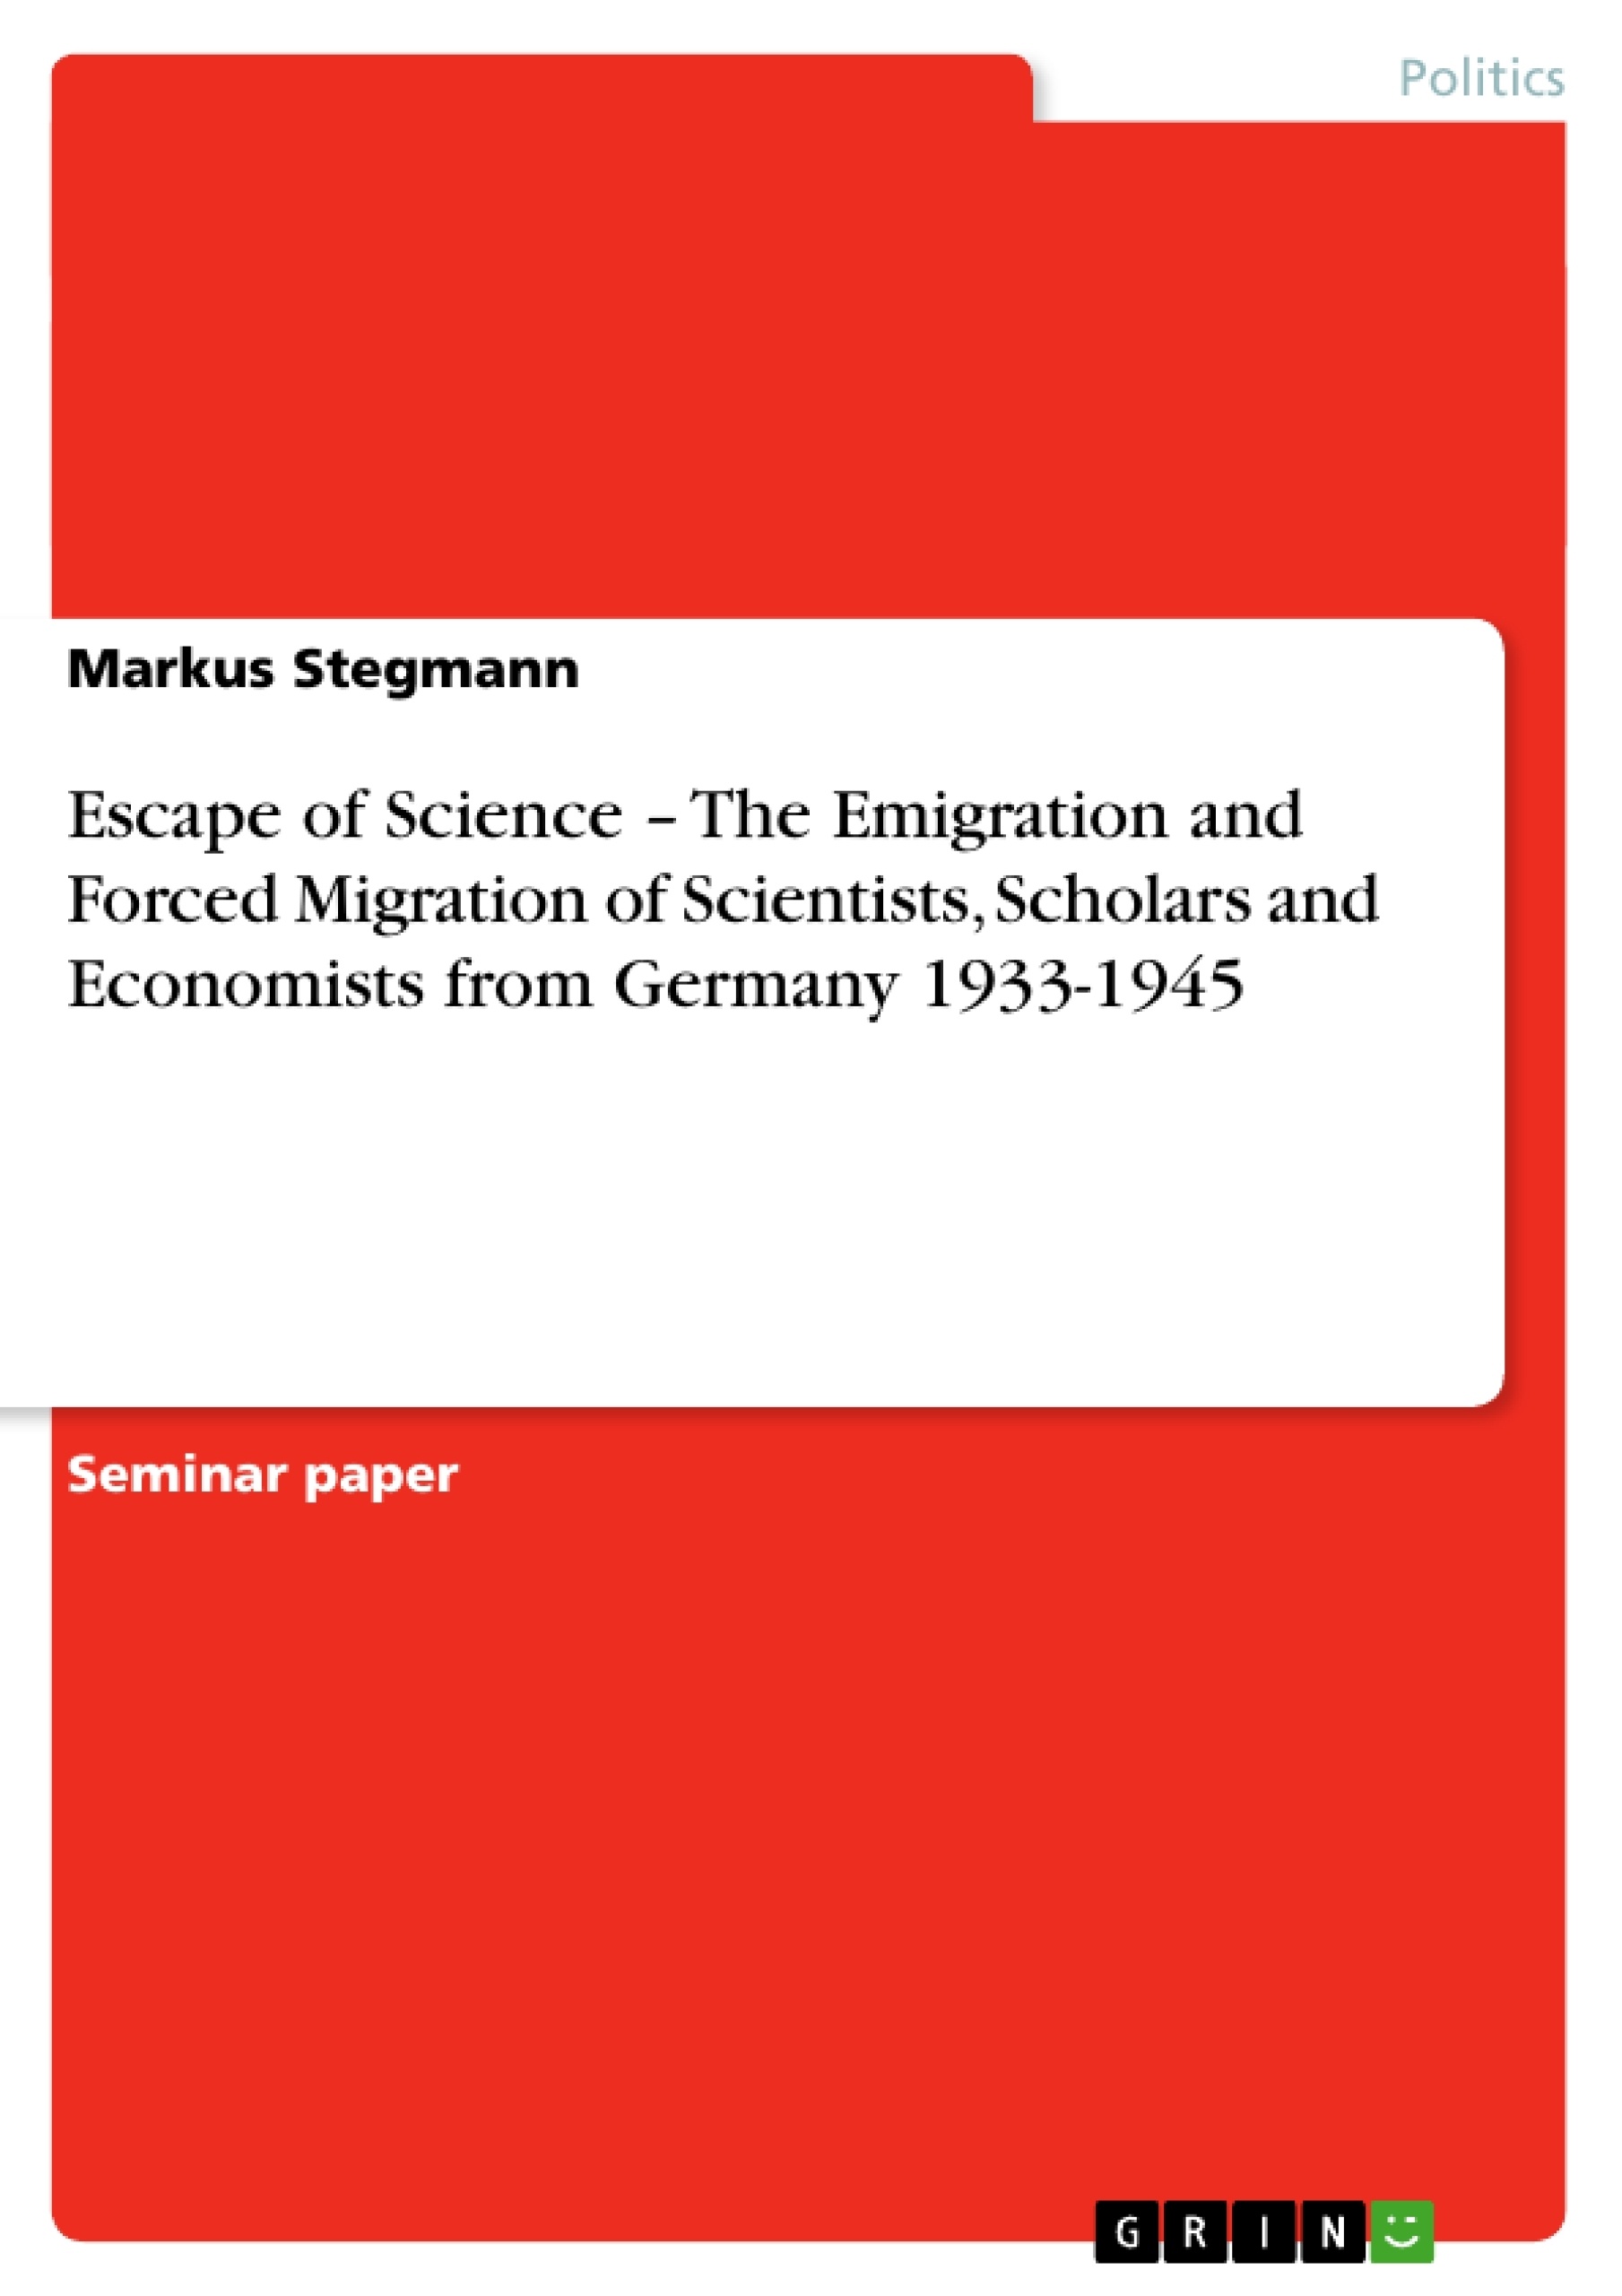 Title: Escape of Science – The Emigration and Forced Migration of Scientists, Scholars and Economists from Germany 1933-1945